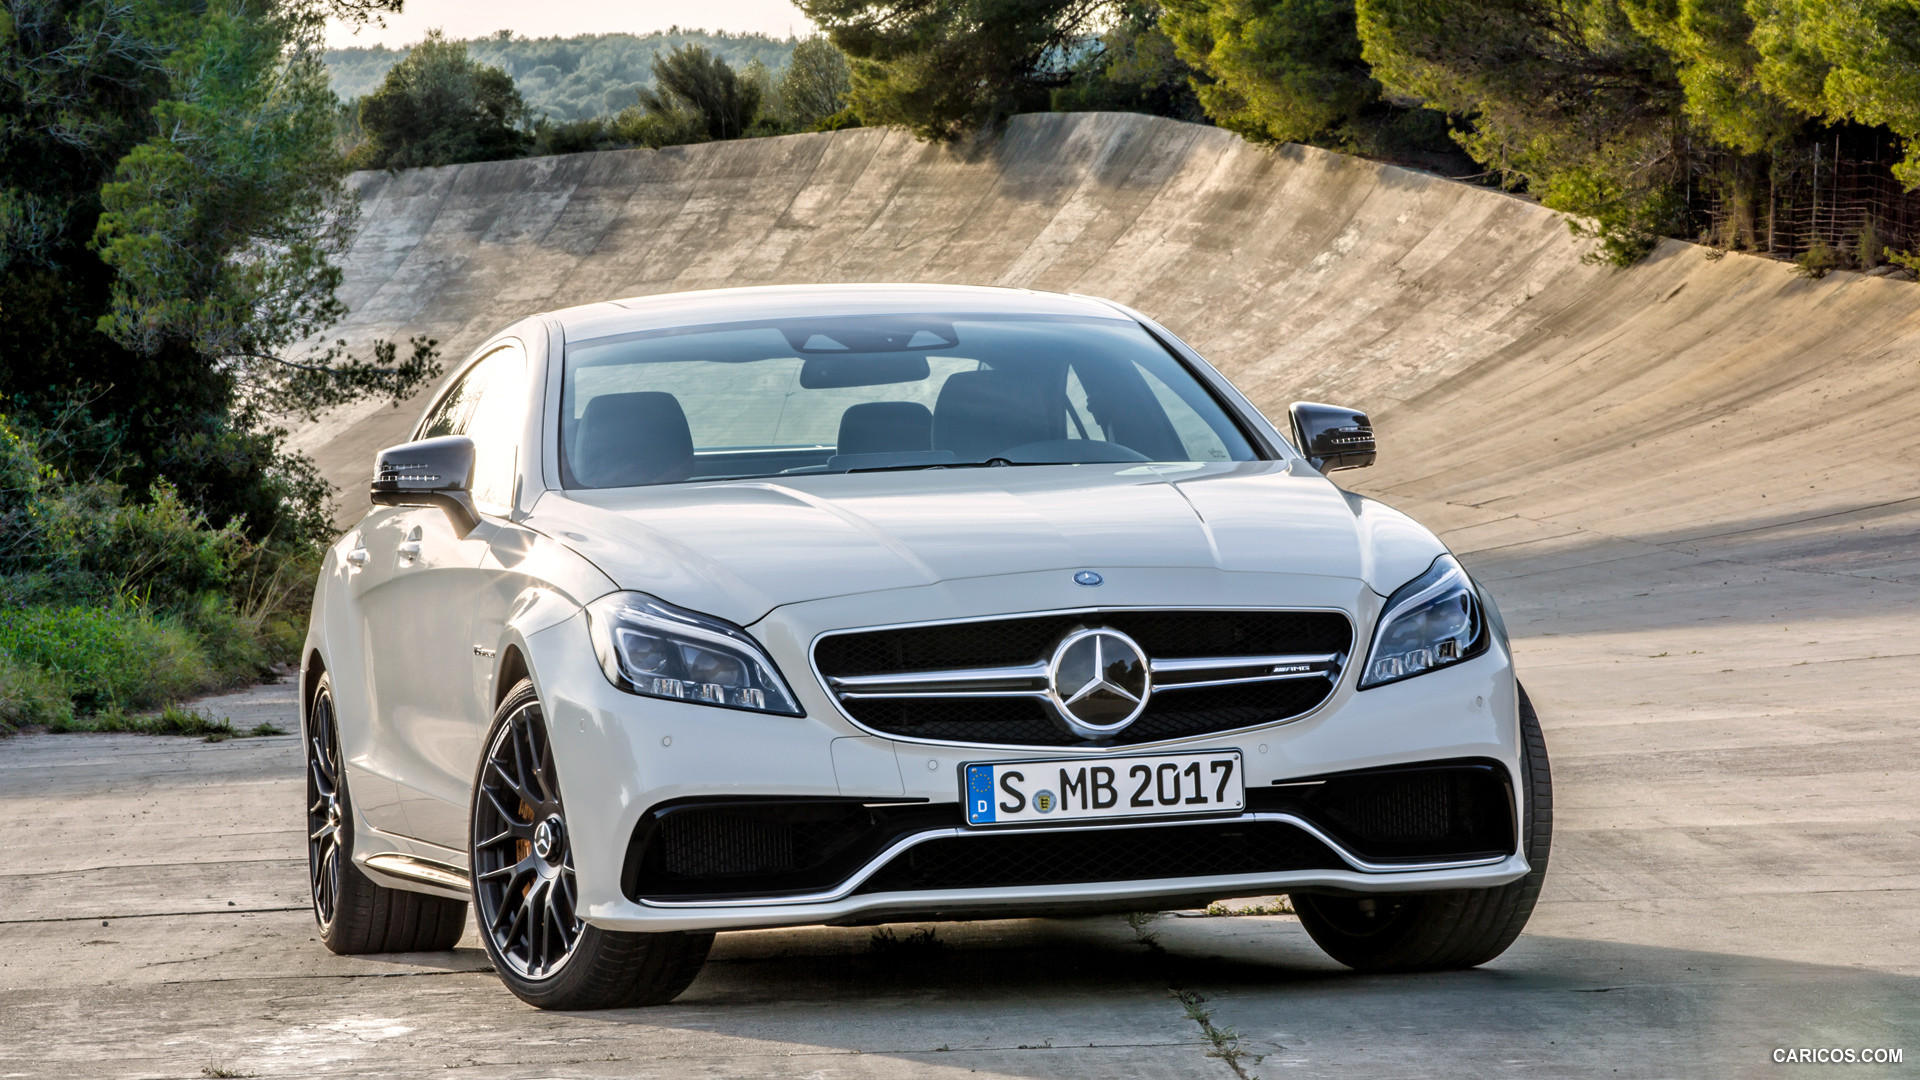 2015 Mercedes-Benz CLS 63 AMG S-Model - Front, #14 of 51